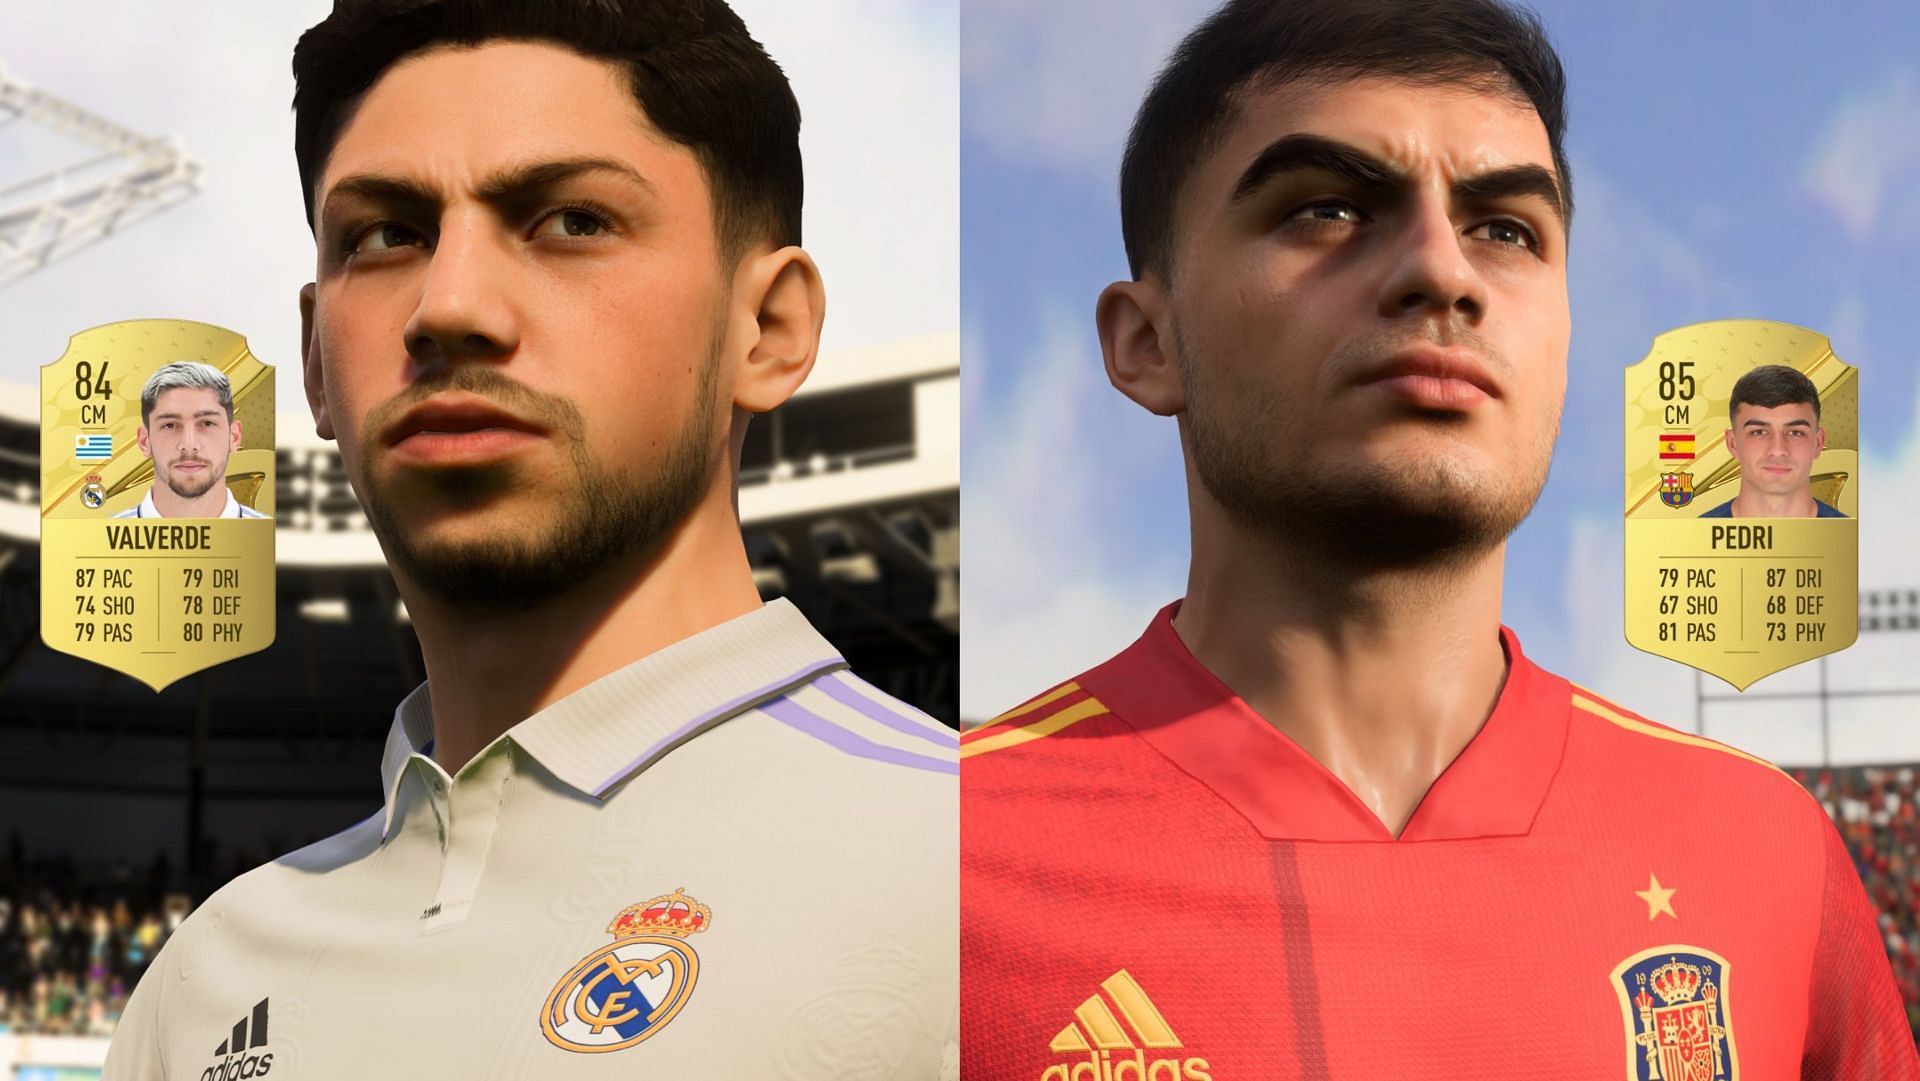 Valverde and Pedri are two amazing youngsters of the La Liga (Images via EA Sports)